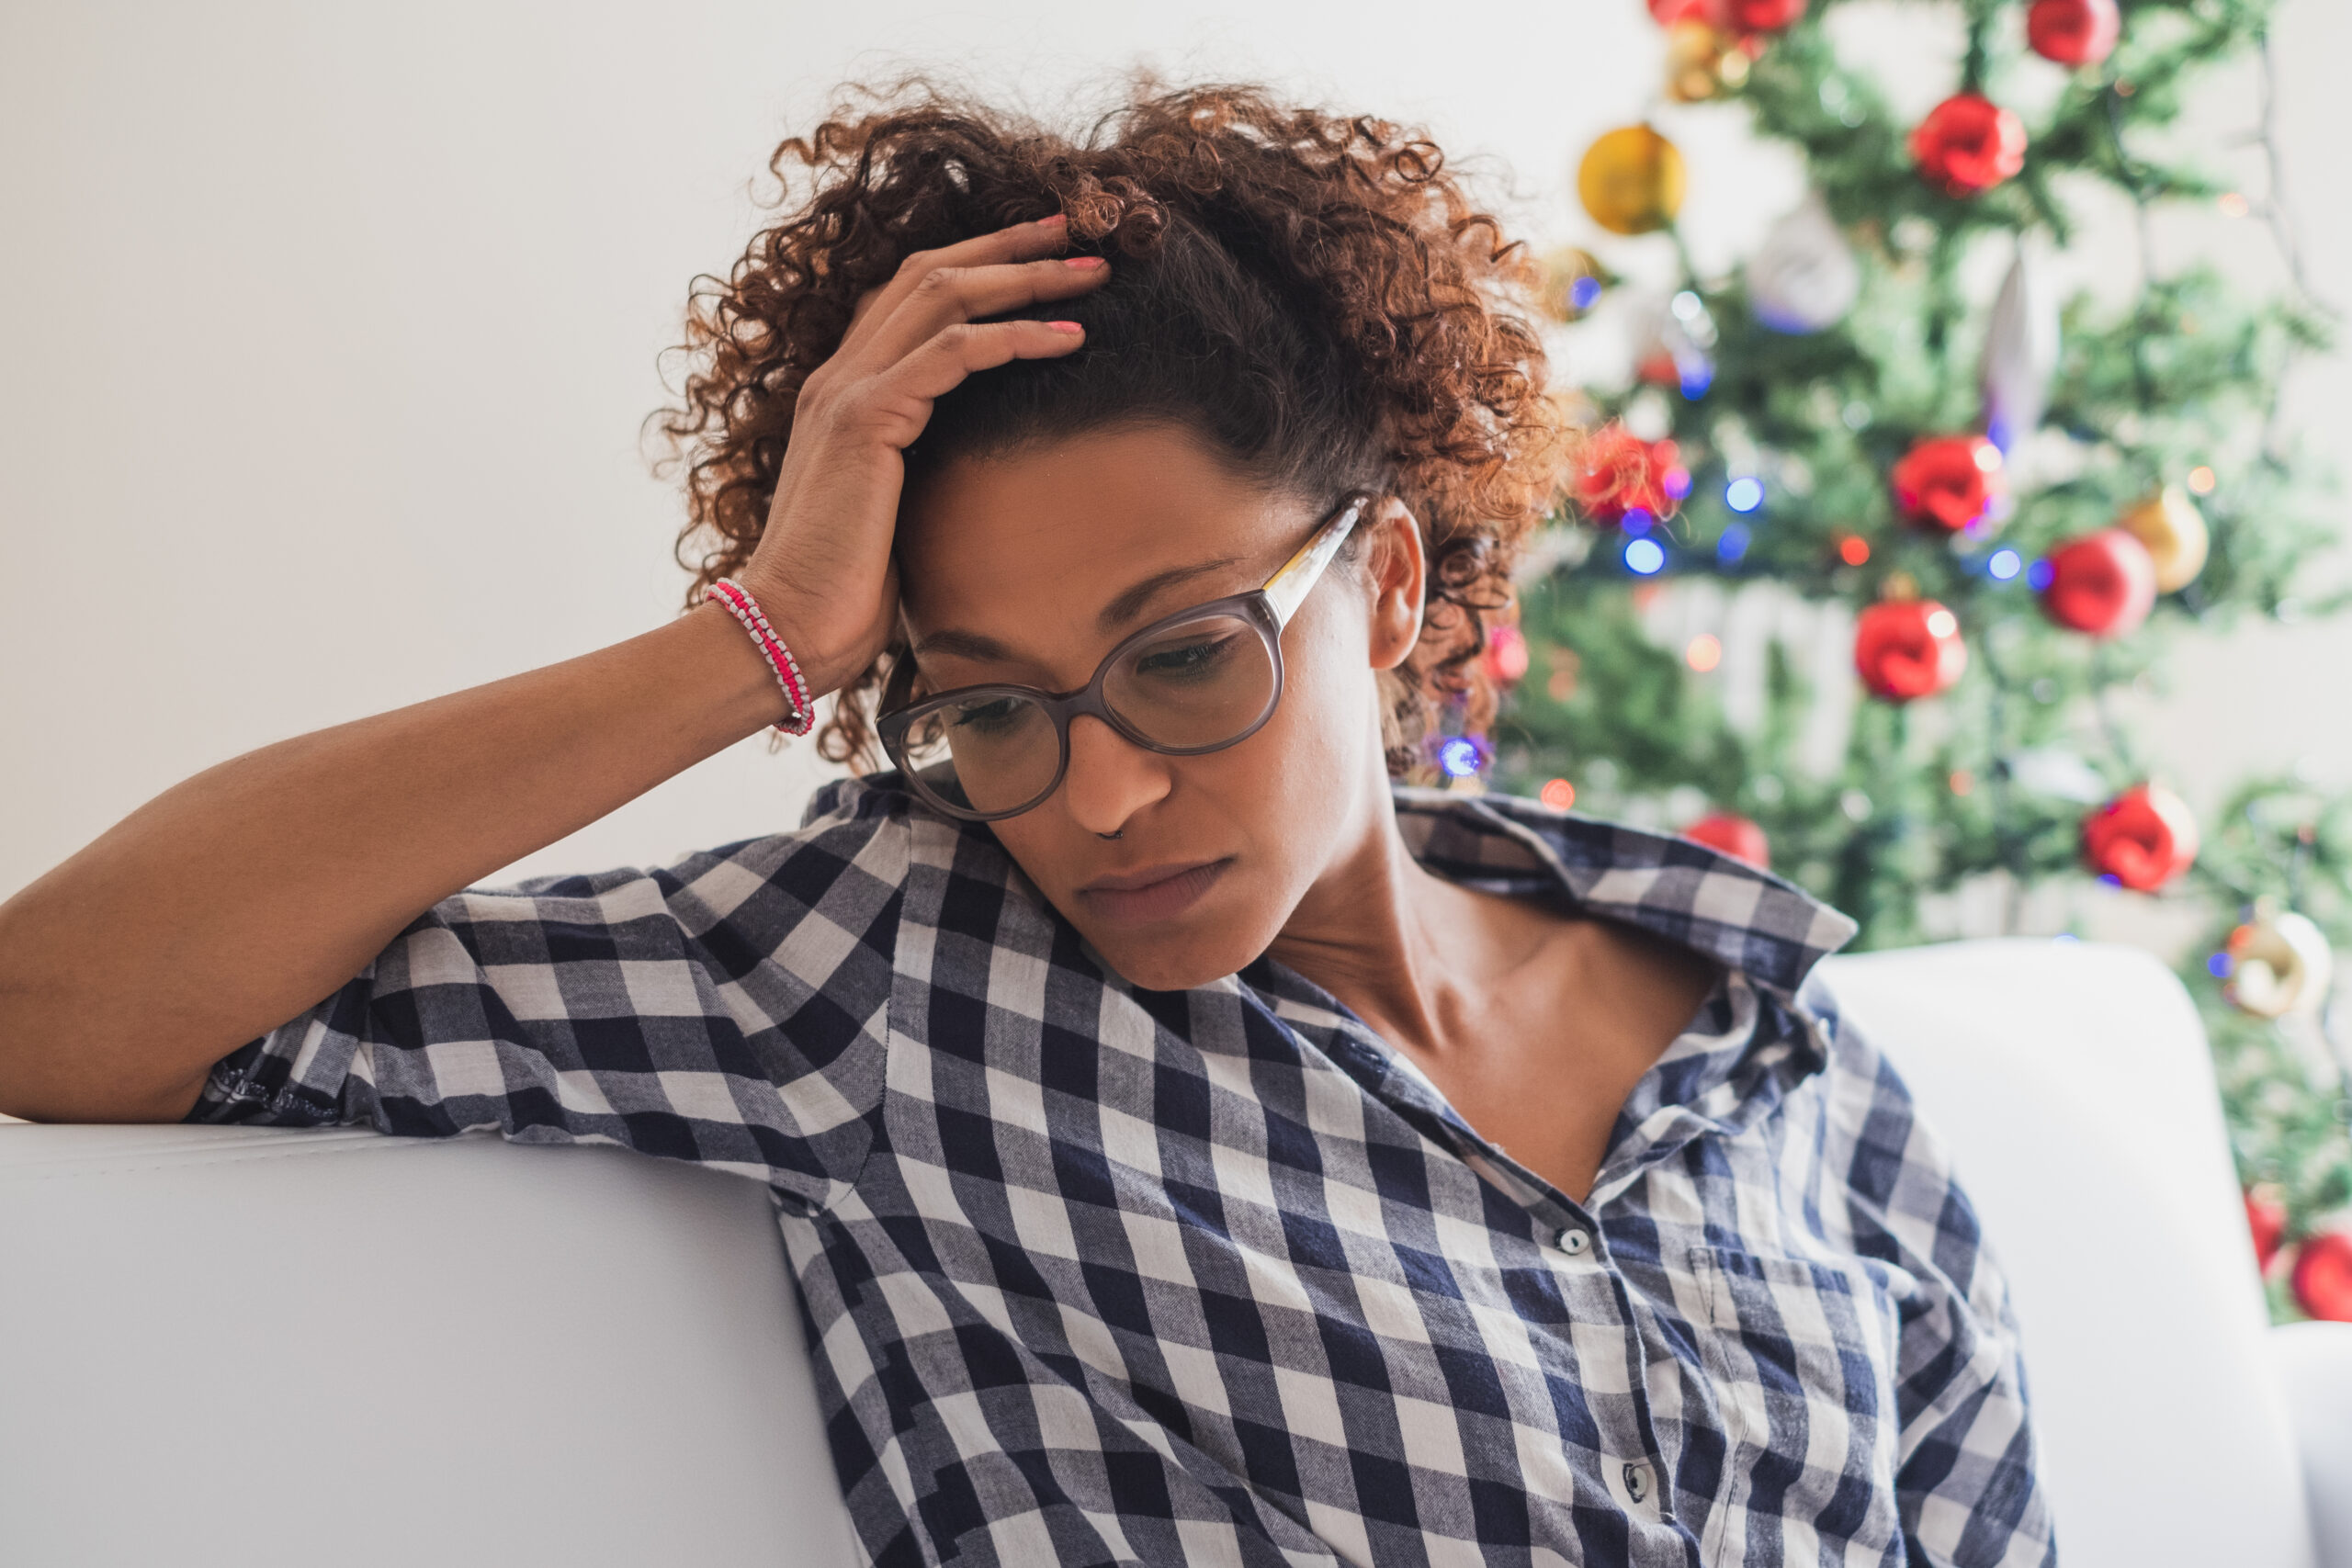 When the Holidays are Not Joy-Filled and You Need Support